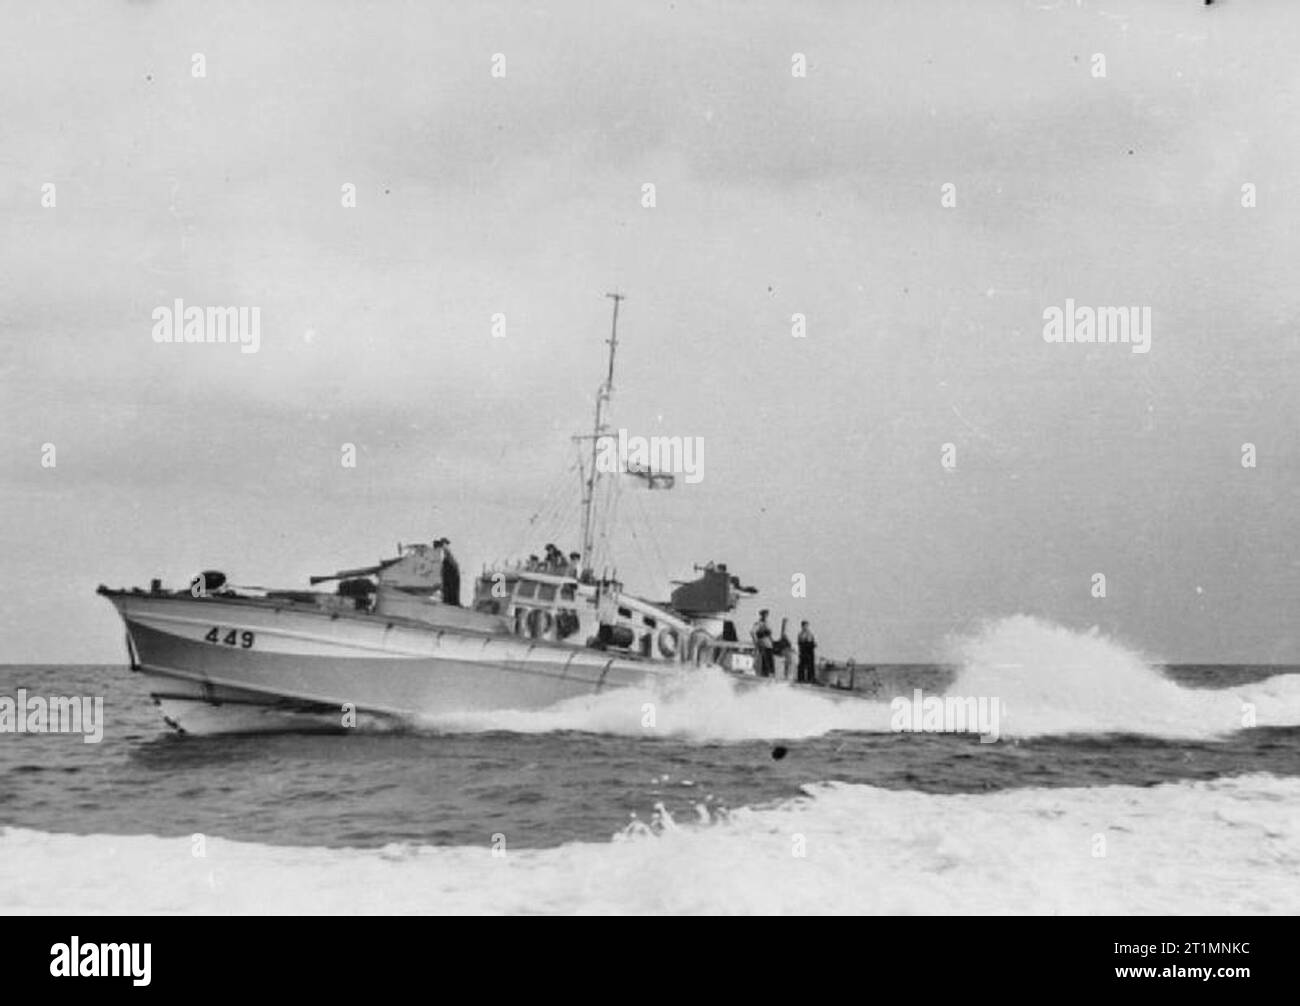 The Royal Navy during the Second World War 71.5ft British Power Boat MTB 449 based at the coastal forces base HMS BEEHIVE. The boat was not fitted with tubes and was really a Motor Gun Boat. Powered by three Packard engines, it had a complement of two officers and 14 ratings. The armament included a 2pdr pom-pom and three 20mm Oerlikons. Stock Photo